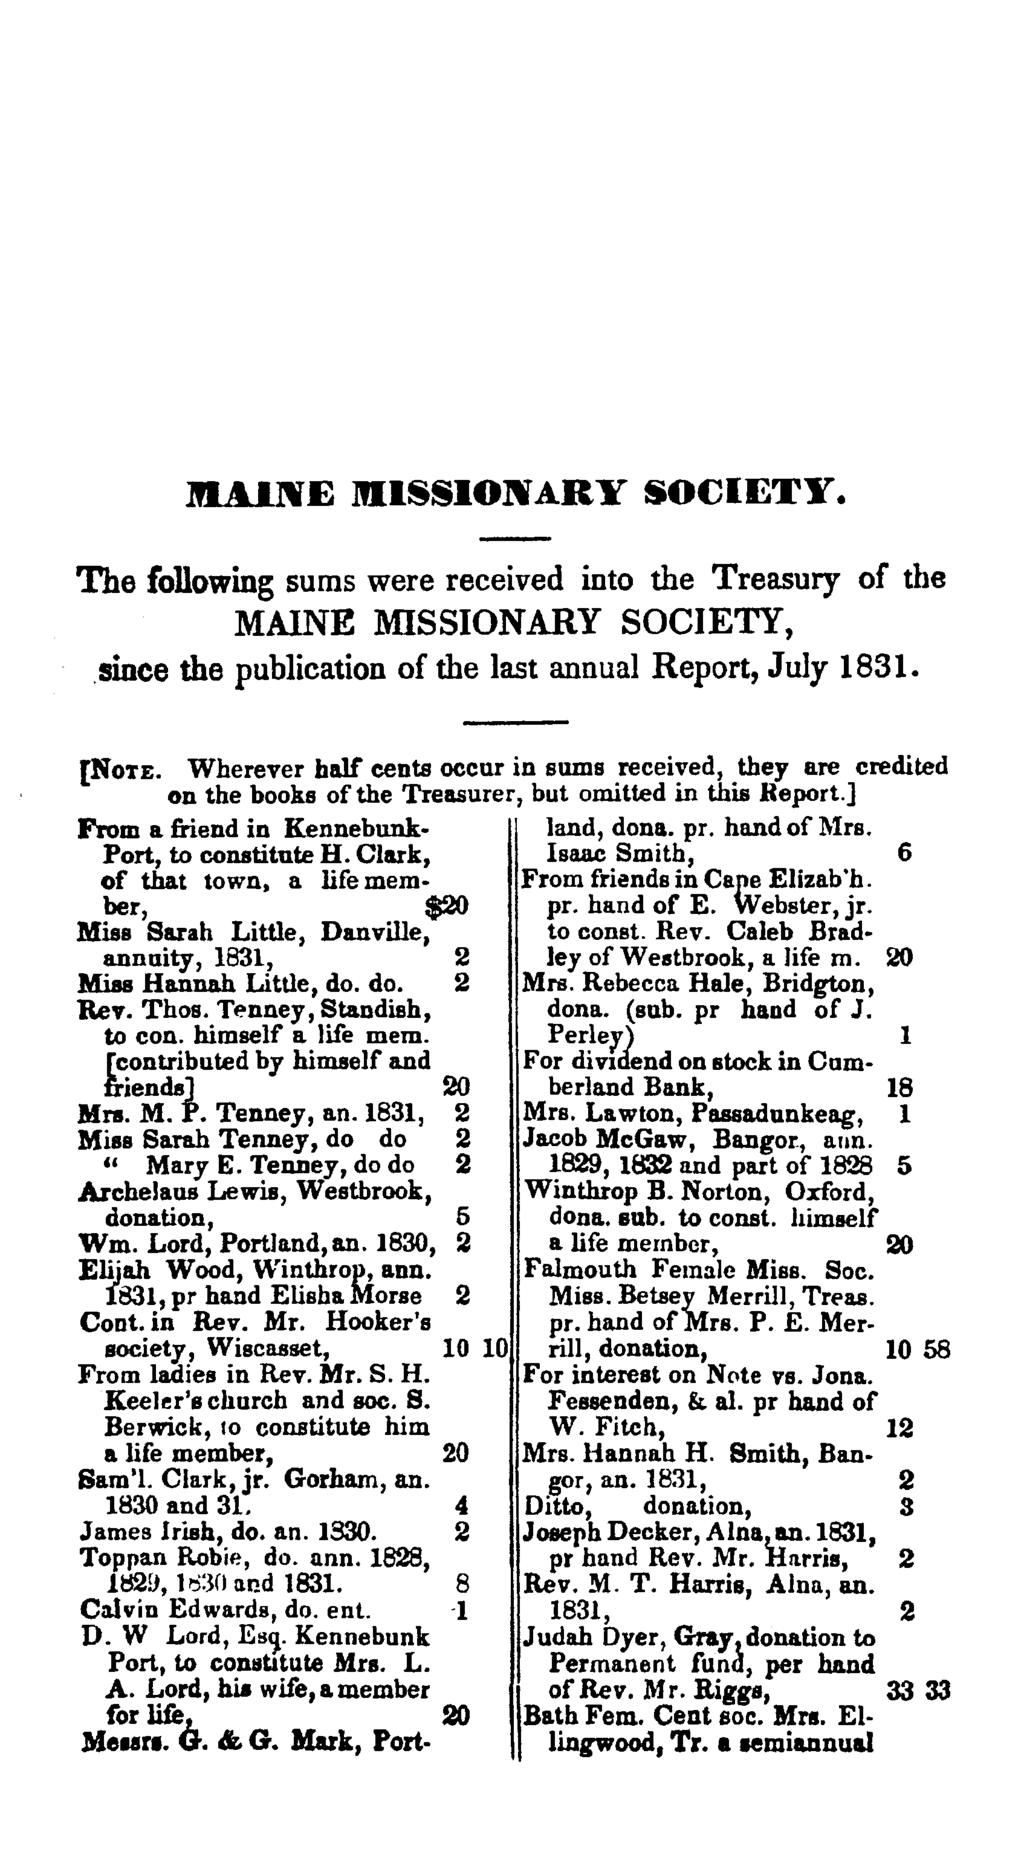 lfta..lne 1tIISSIO!WARY SOCIETY. The following sums were received into the Treasury of the MAINE MISSIONARY SOCIETY,.since the publication of the last annual Report, July 1831. [NOTE.